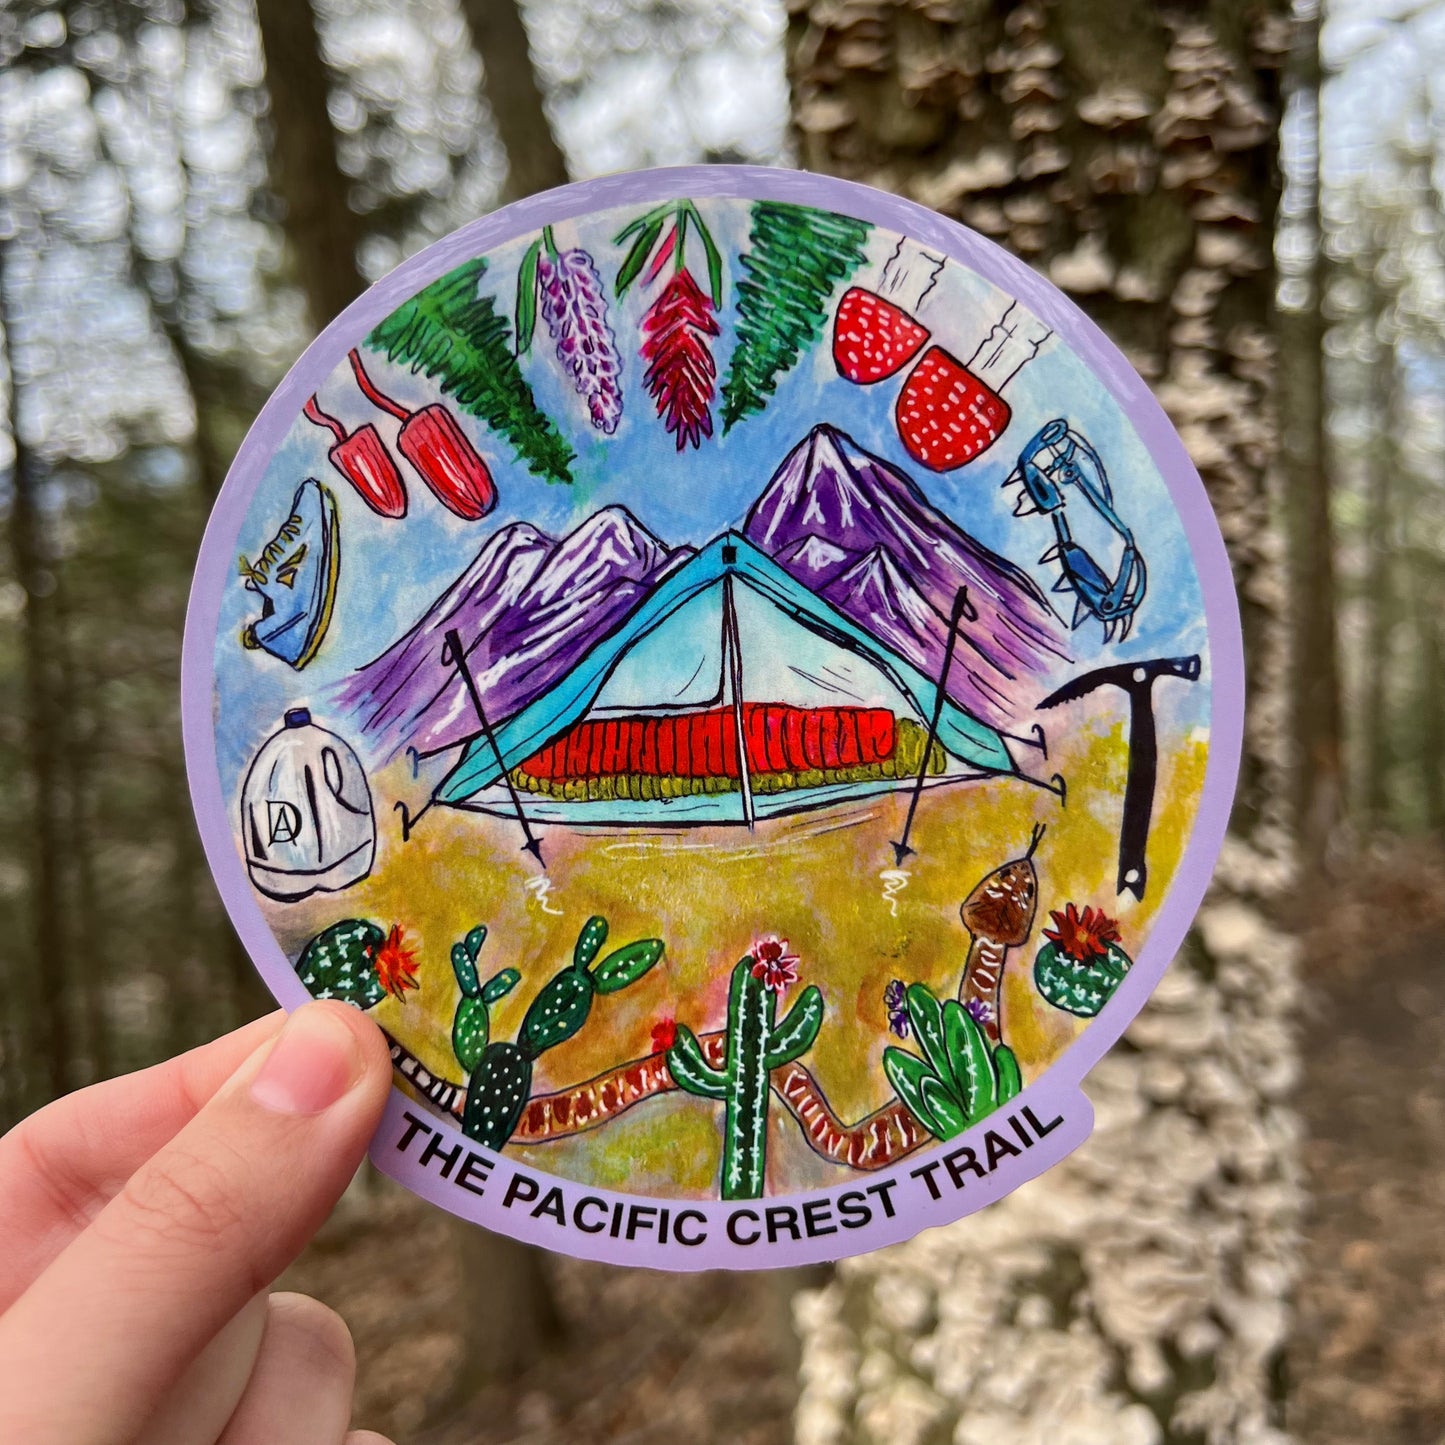 Hiking Sticker: "Ode to the Pacific Crest Trail"